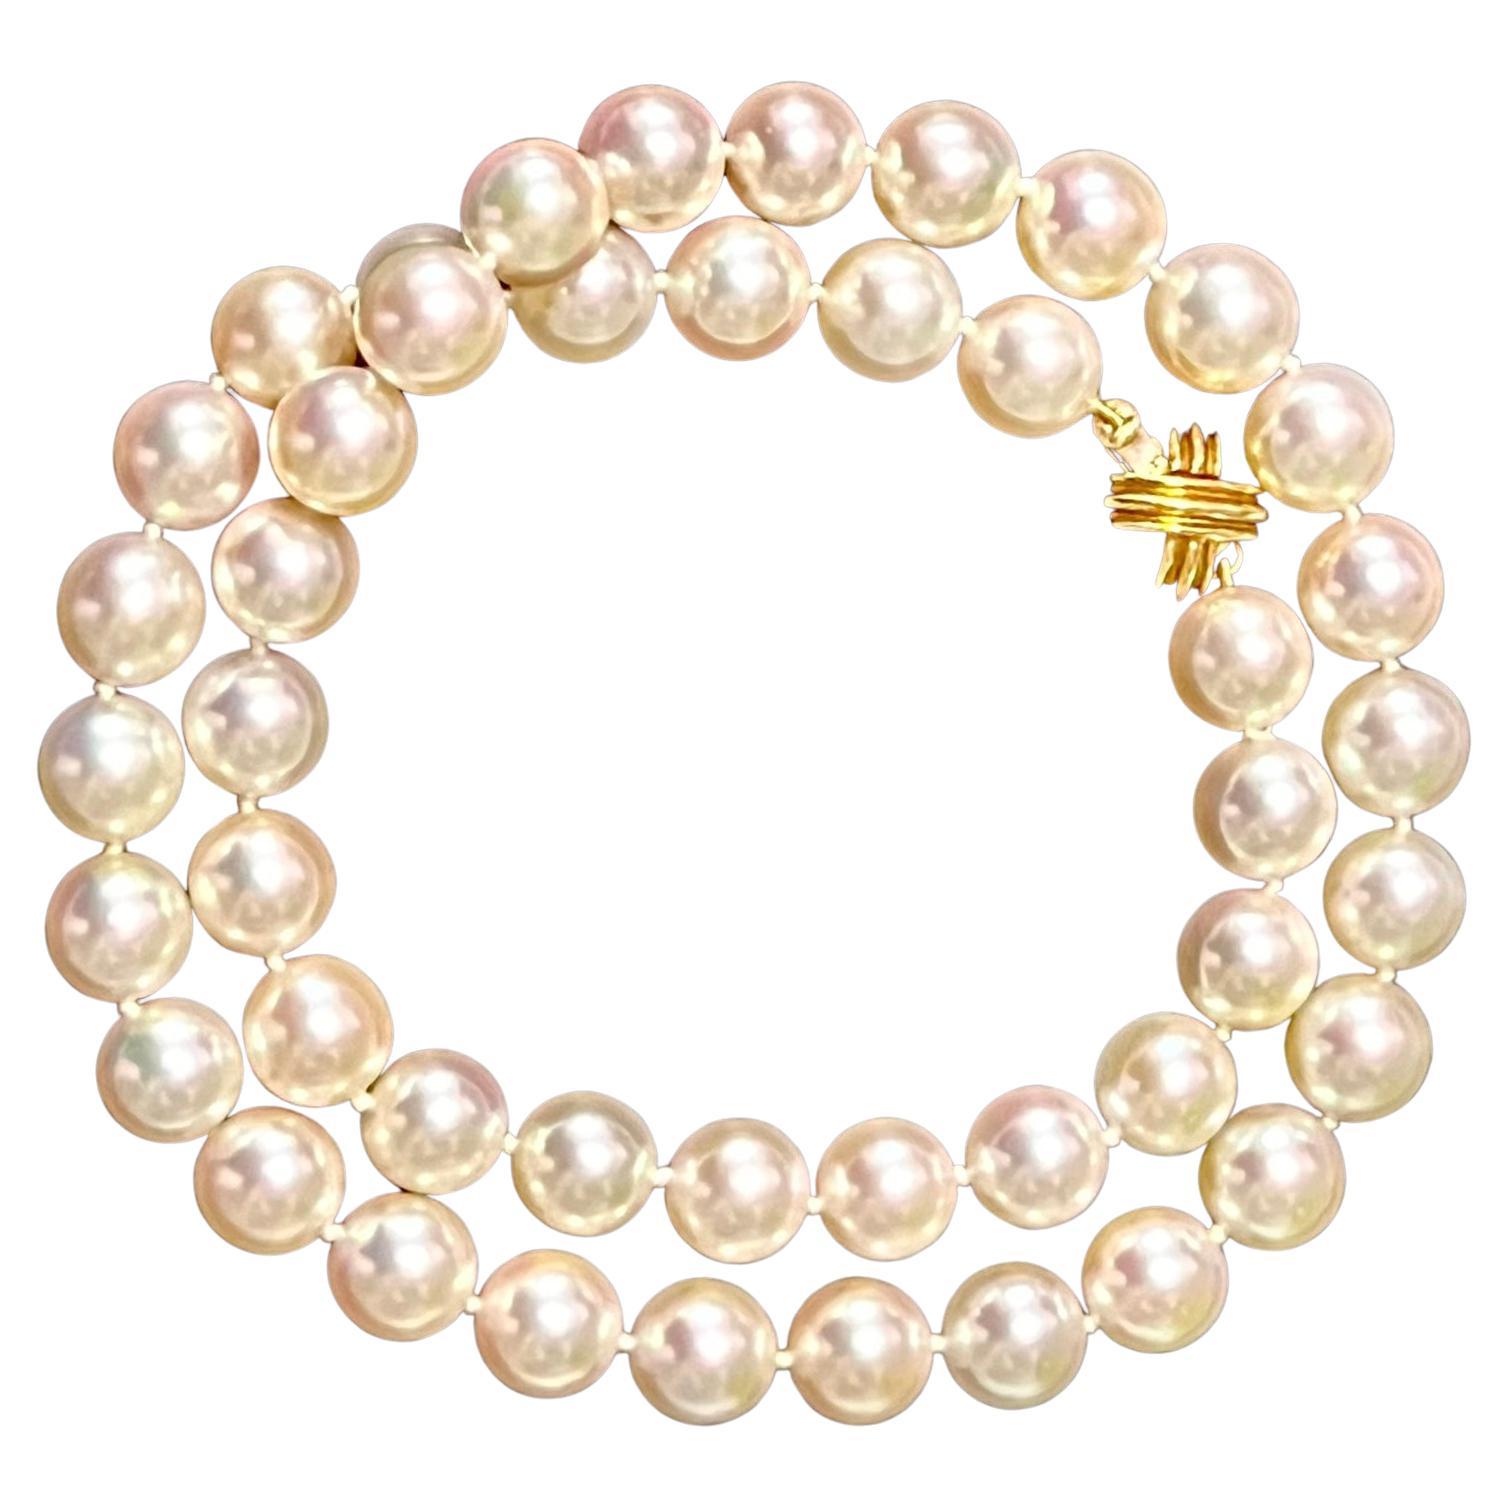 Tiffany & Co Estate Akoya Pearl Necklace 17" 18k Gold 9 mm Certified